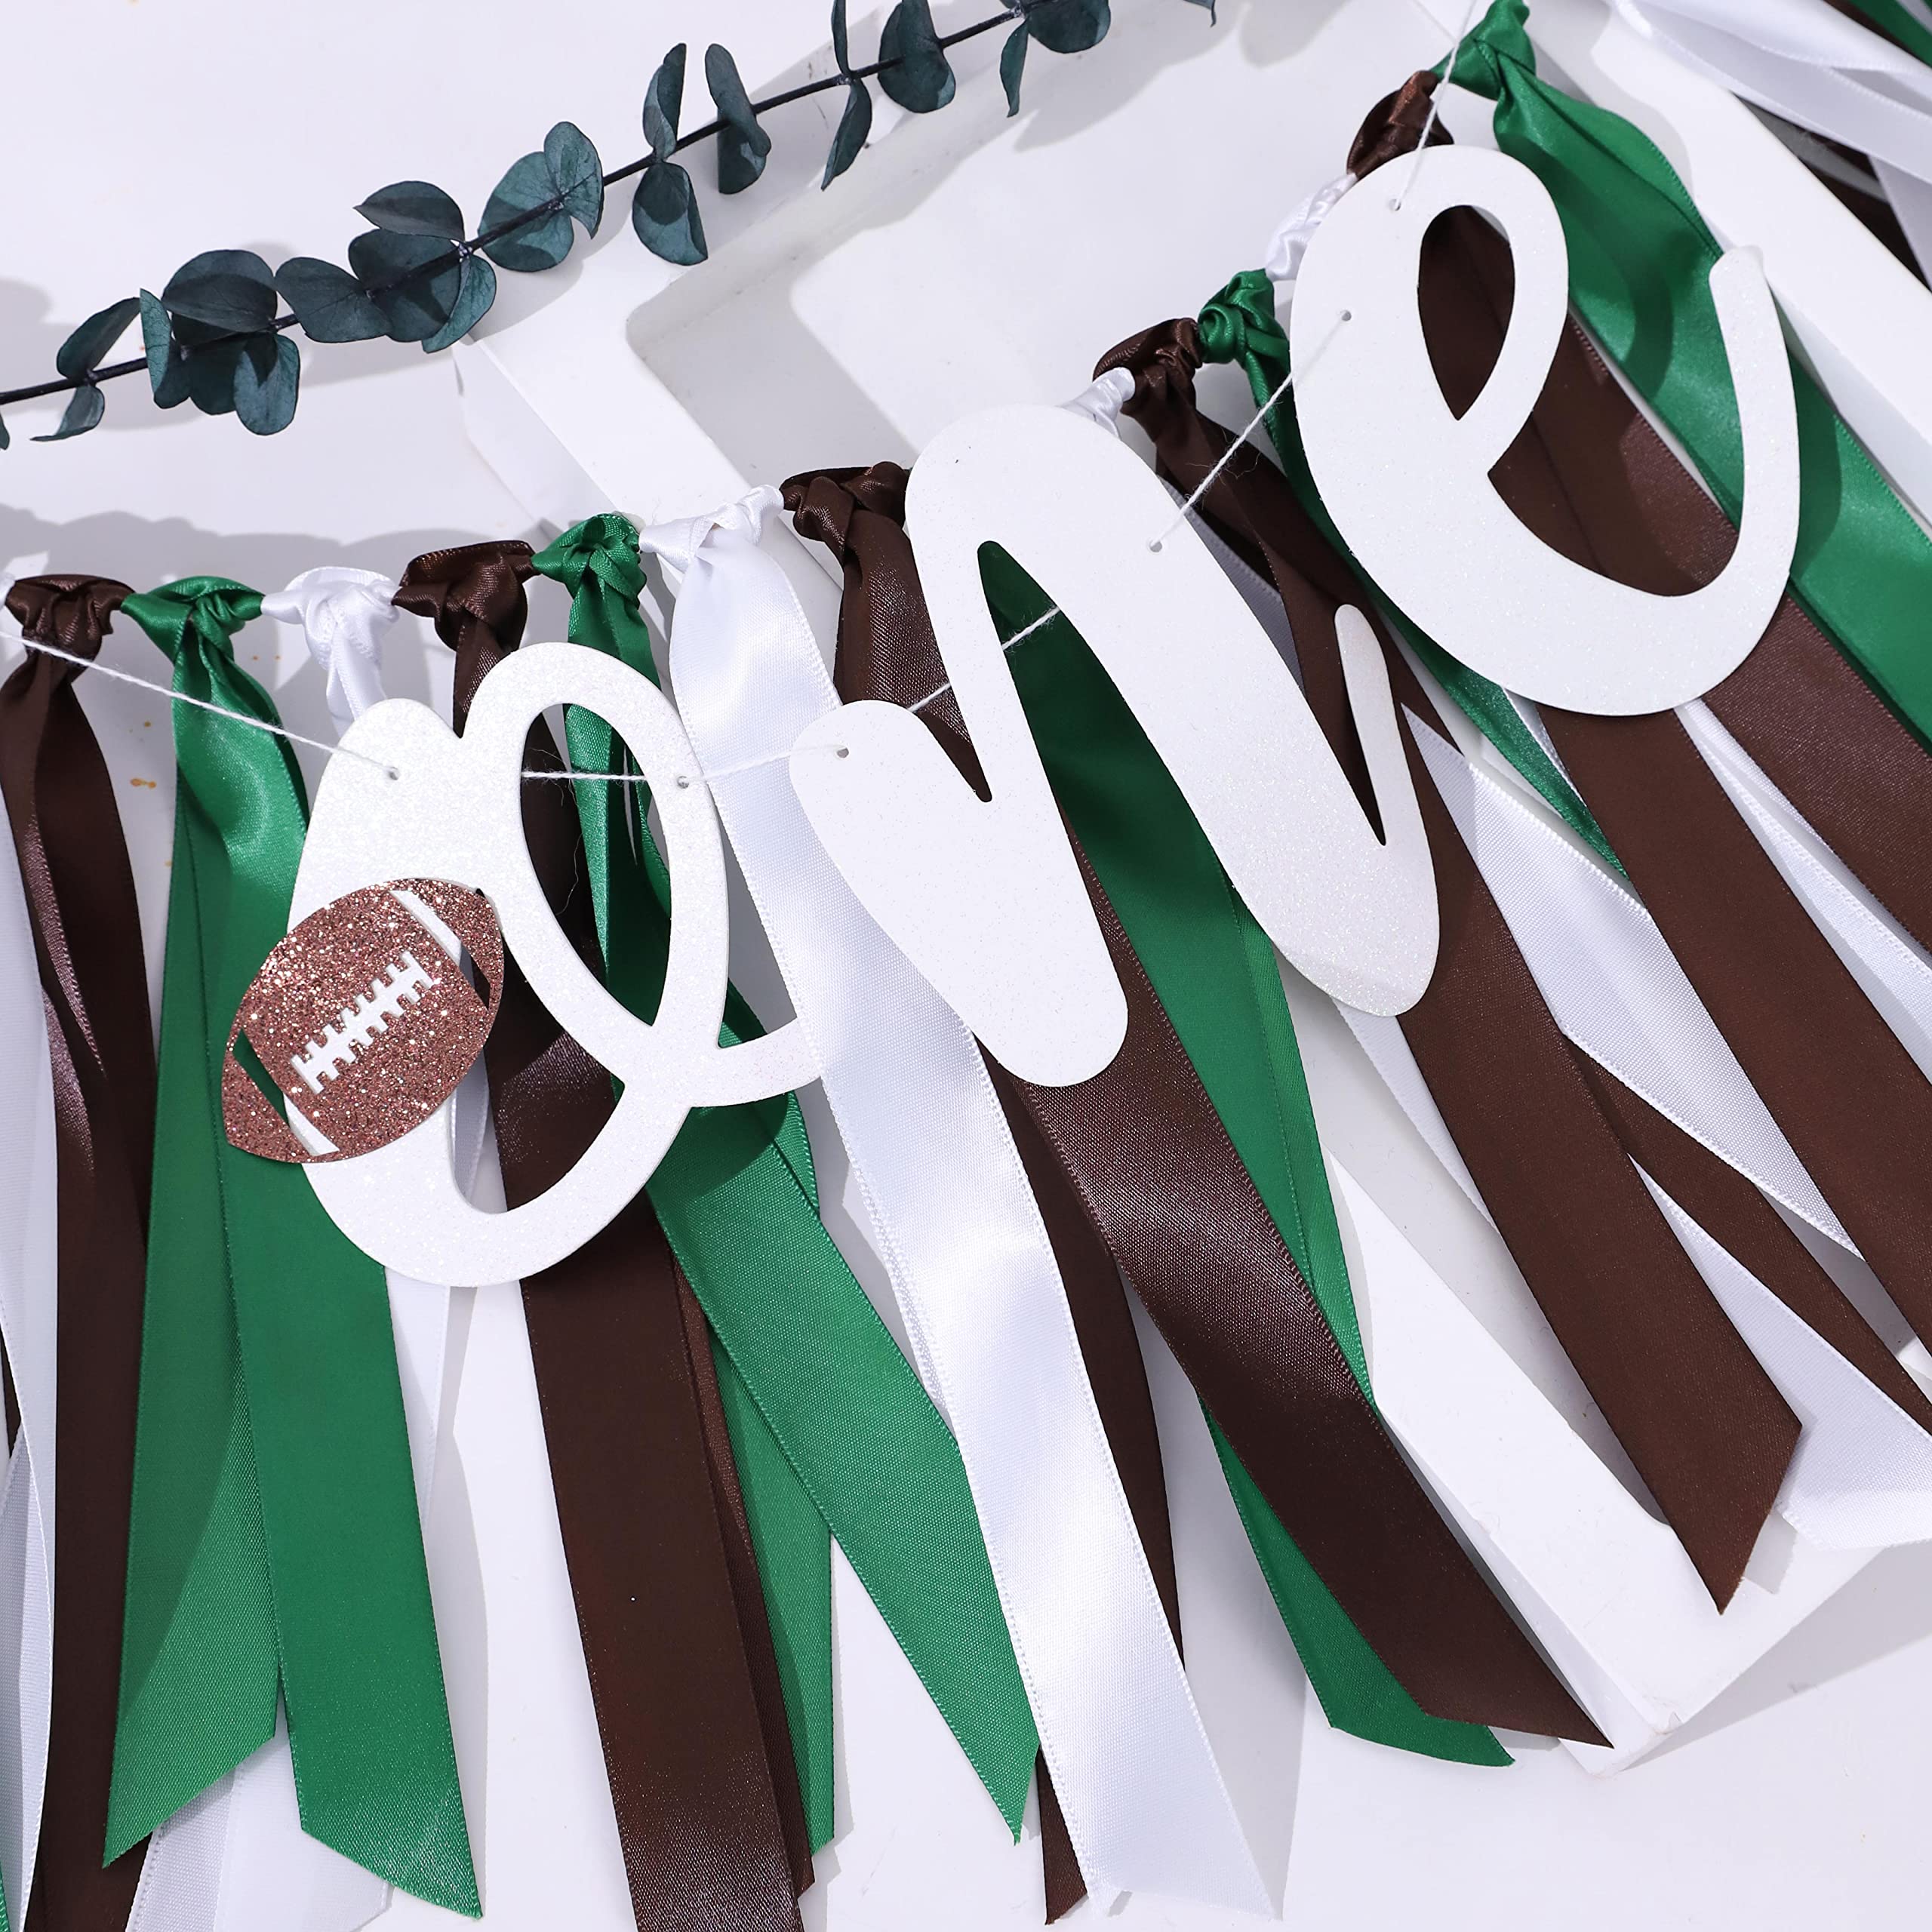 Football 1st Birthday High Chair Banner,Football Party, Happy 1st Birthday Banner, Party Photo Props, Football Crushed Cake Photo Props (Football Banner)